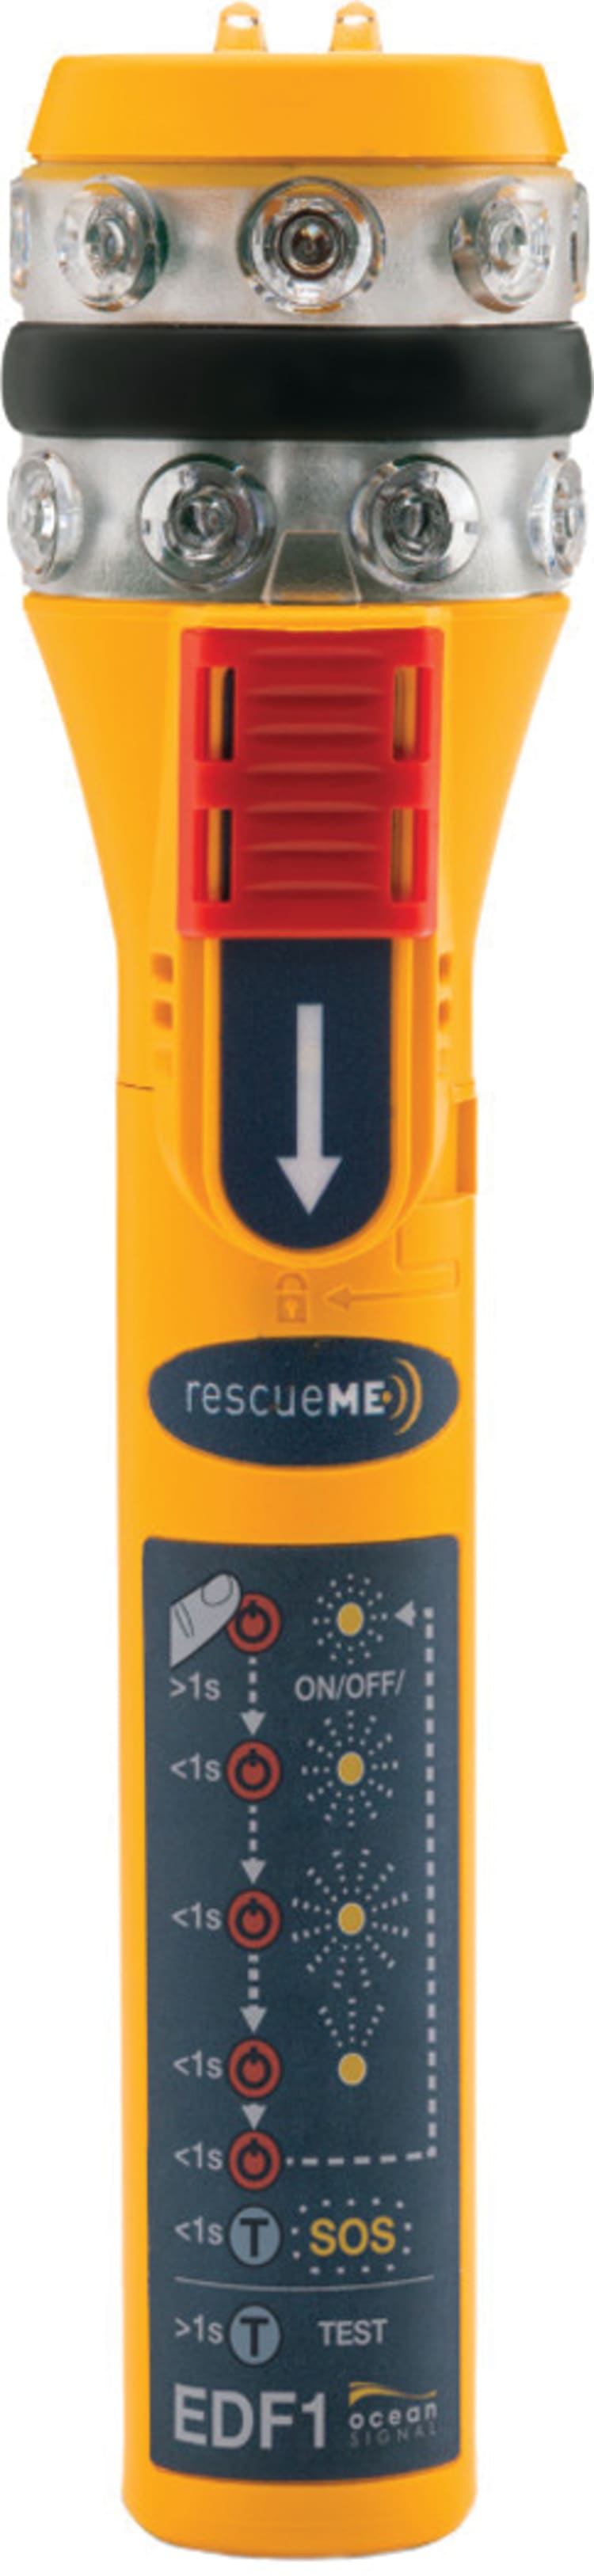 RescueMe from Ocean Signal